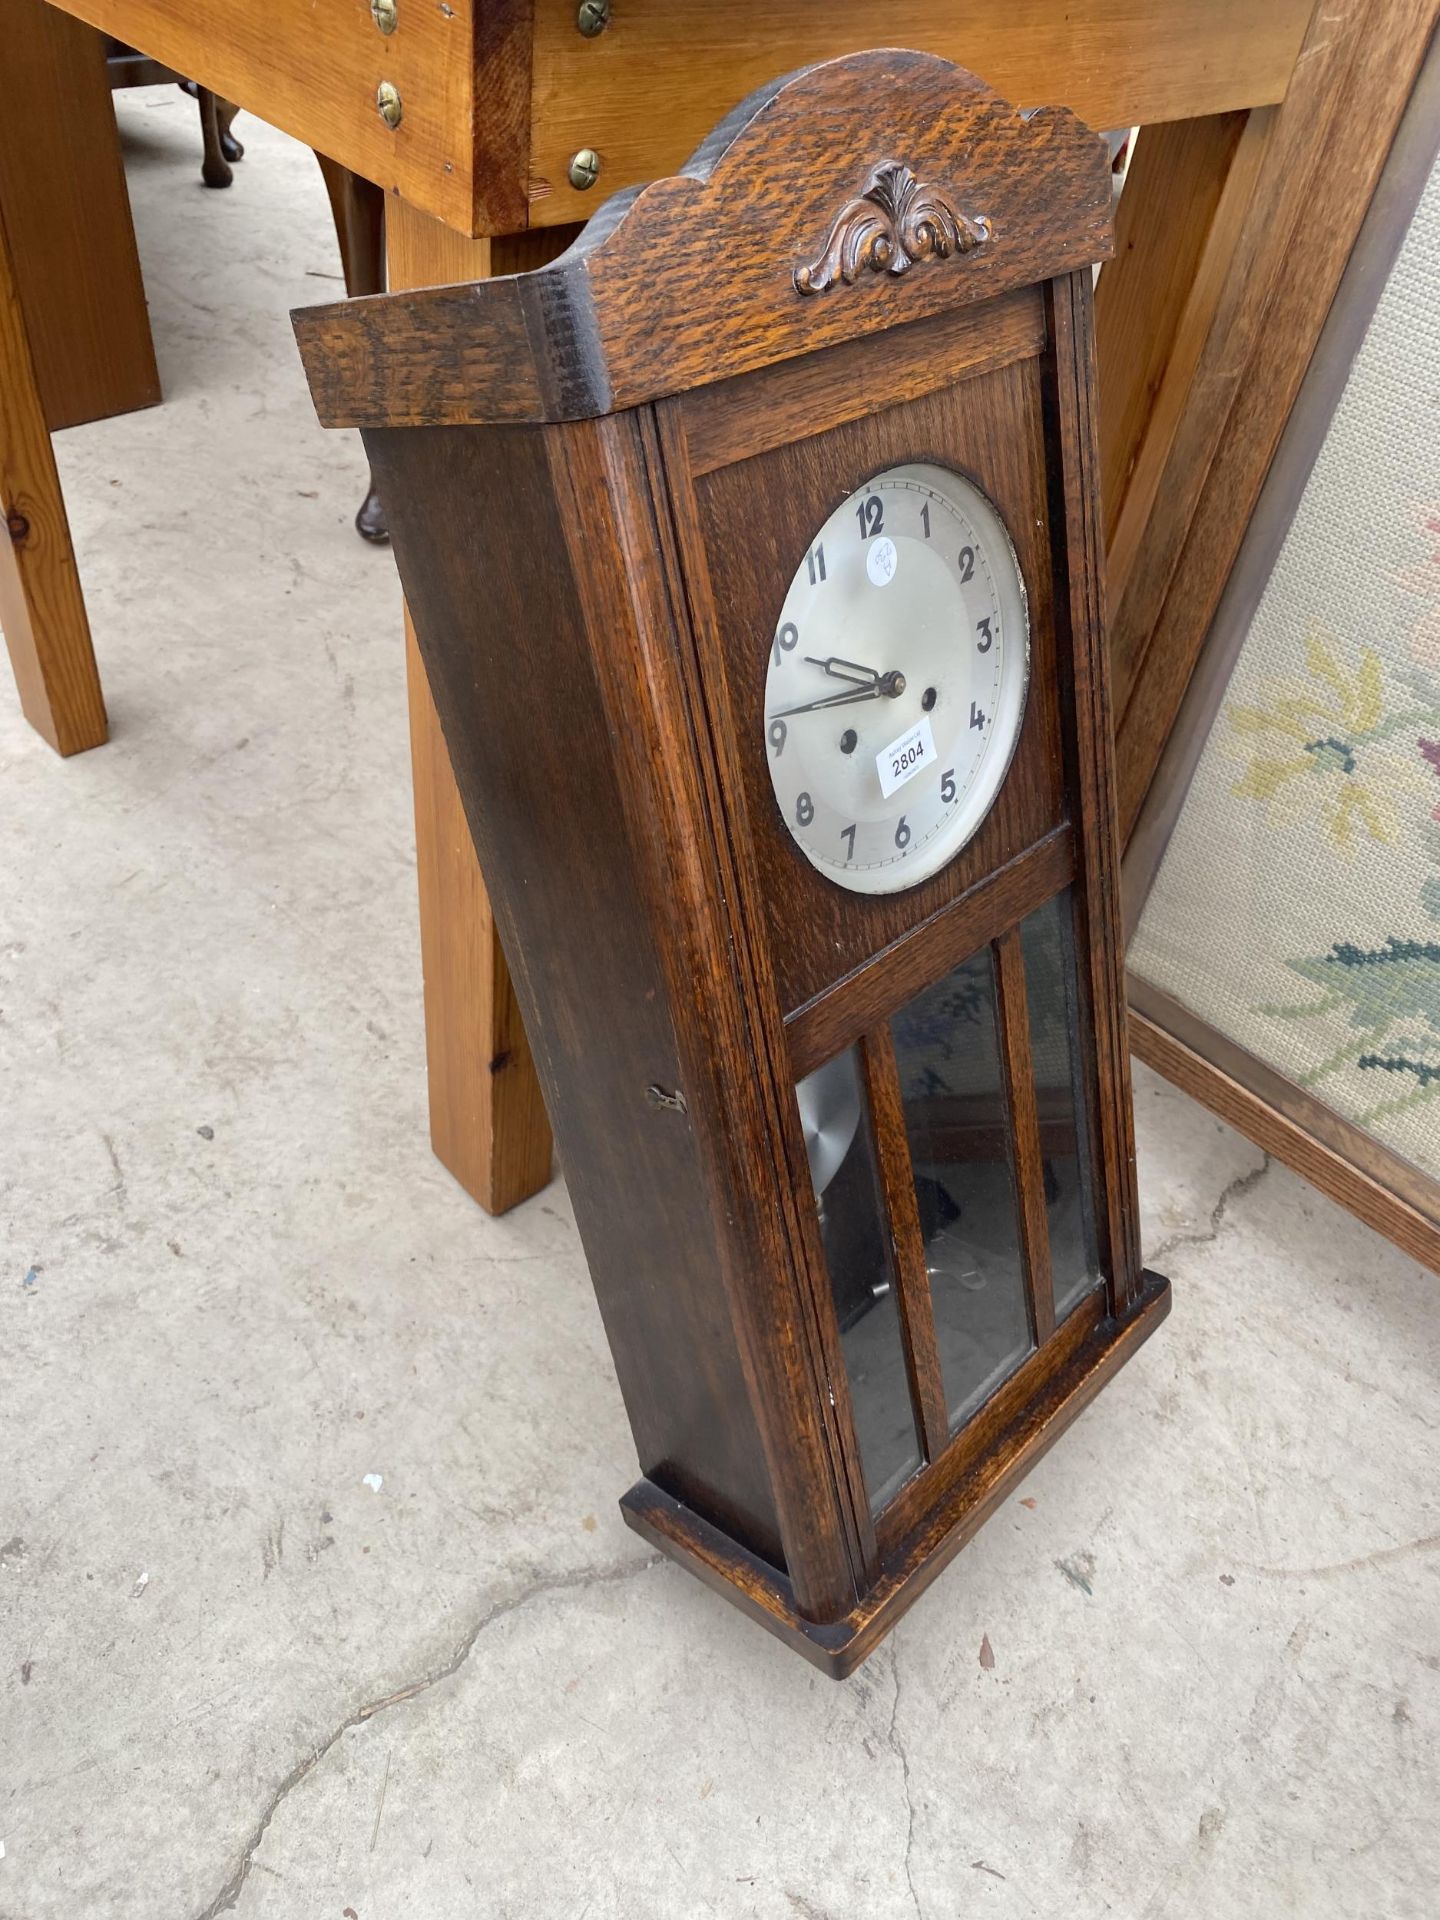 A MID 20TH CENTURY OAK EIGHT-DAY WALL CLOCK - Image 2 of 3